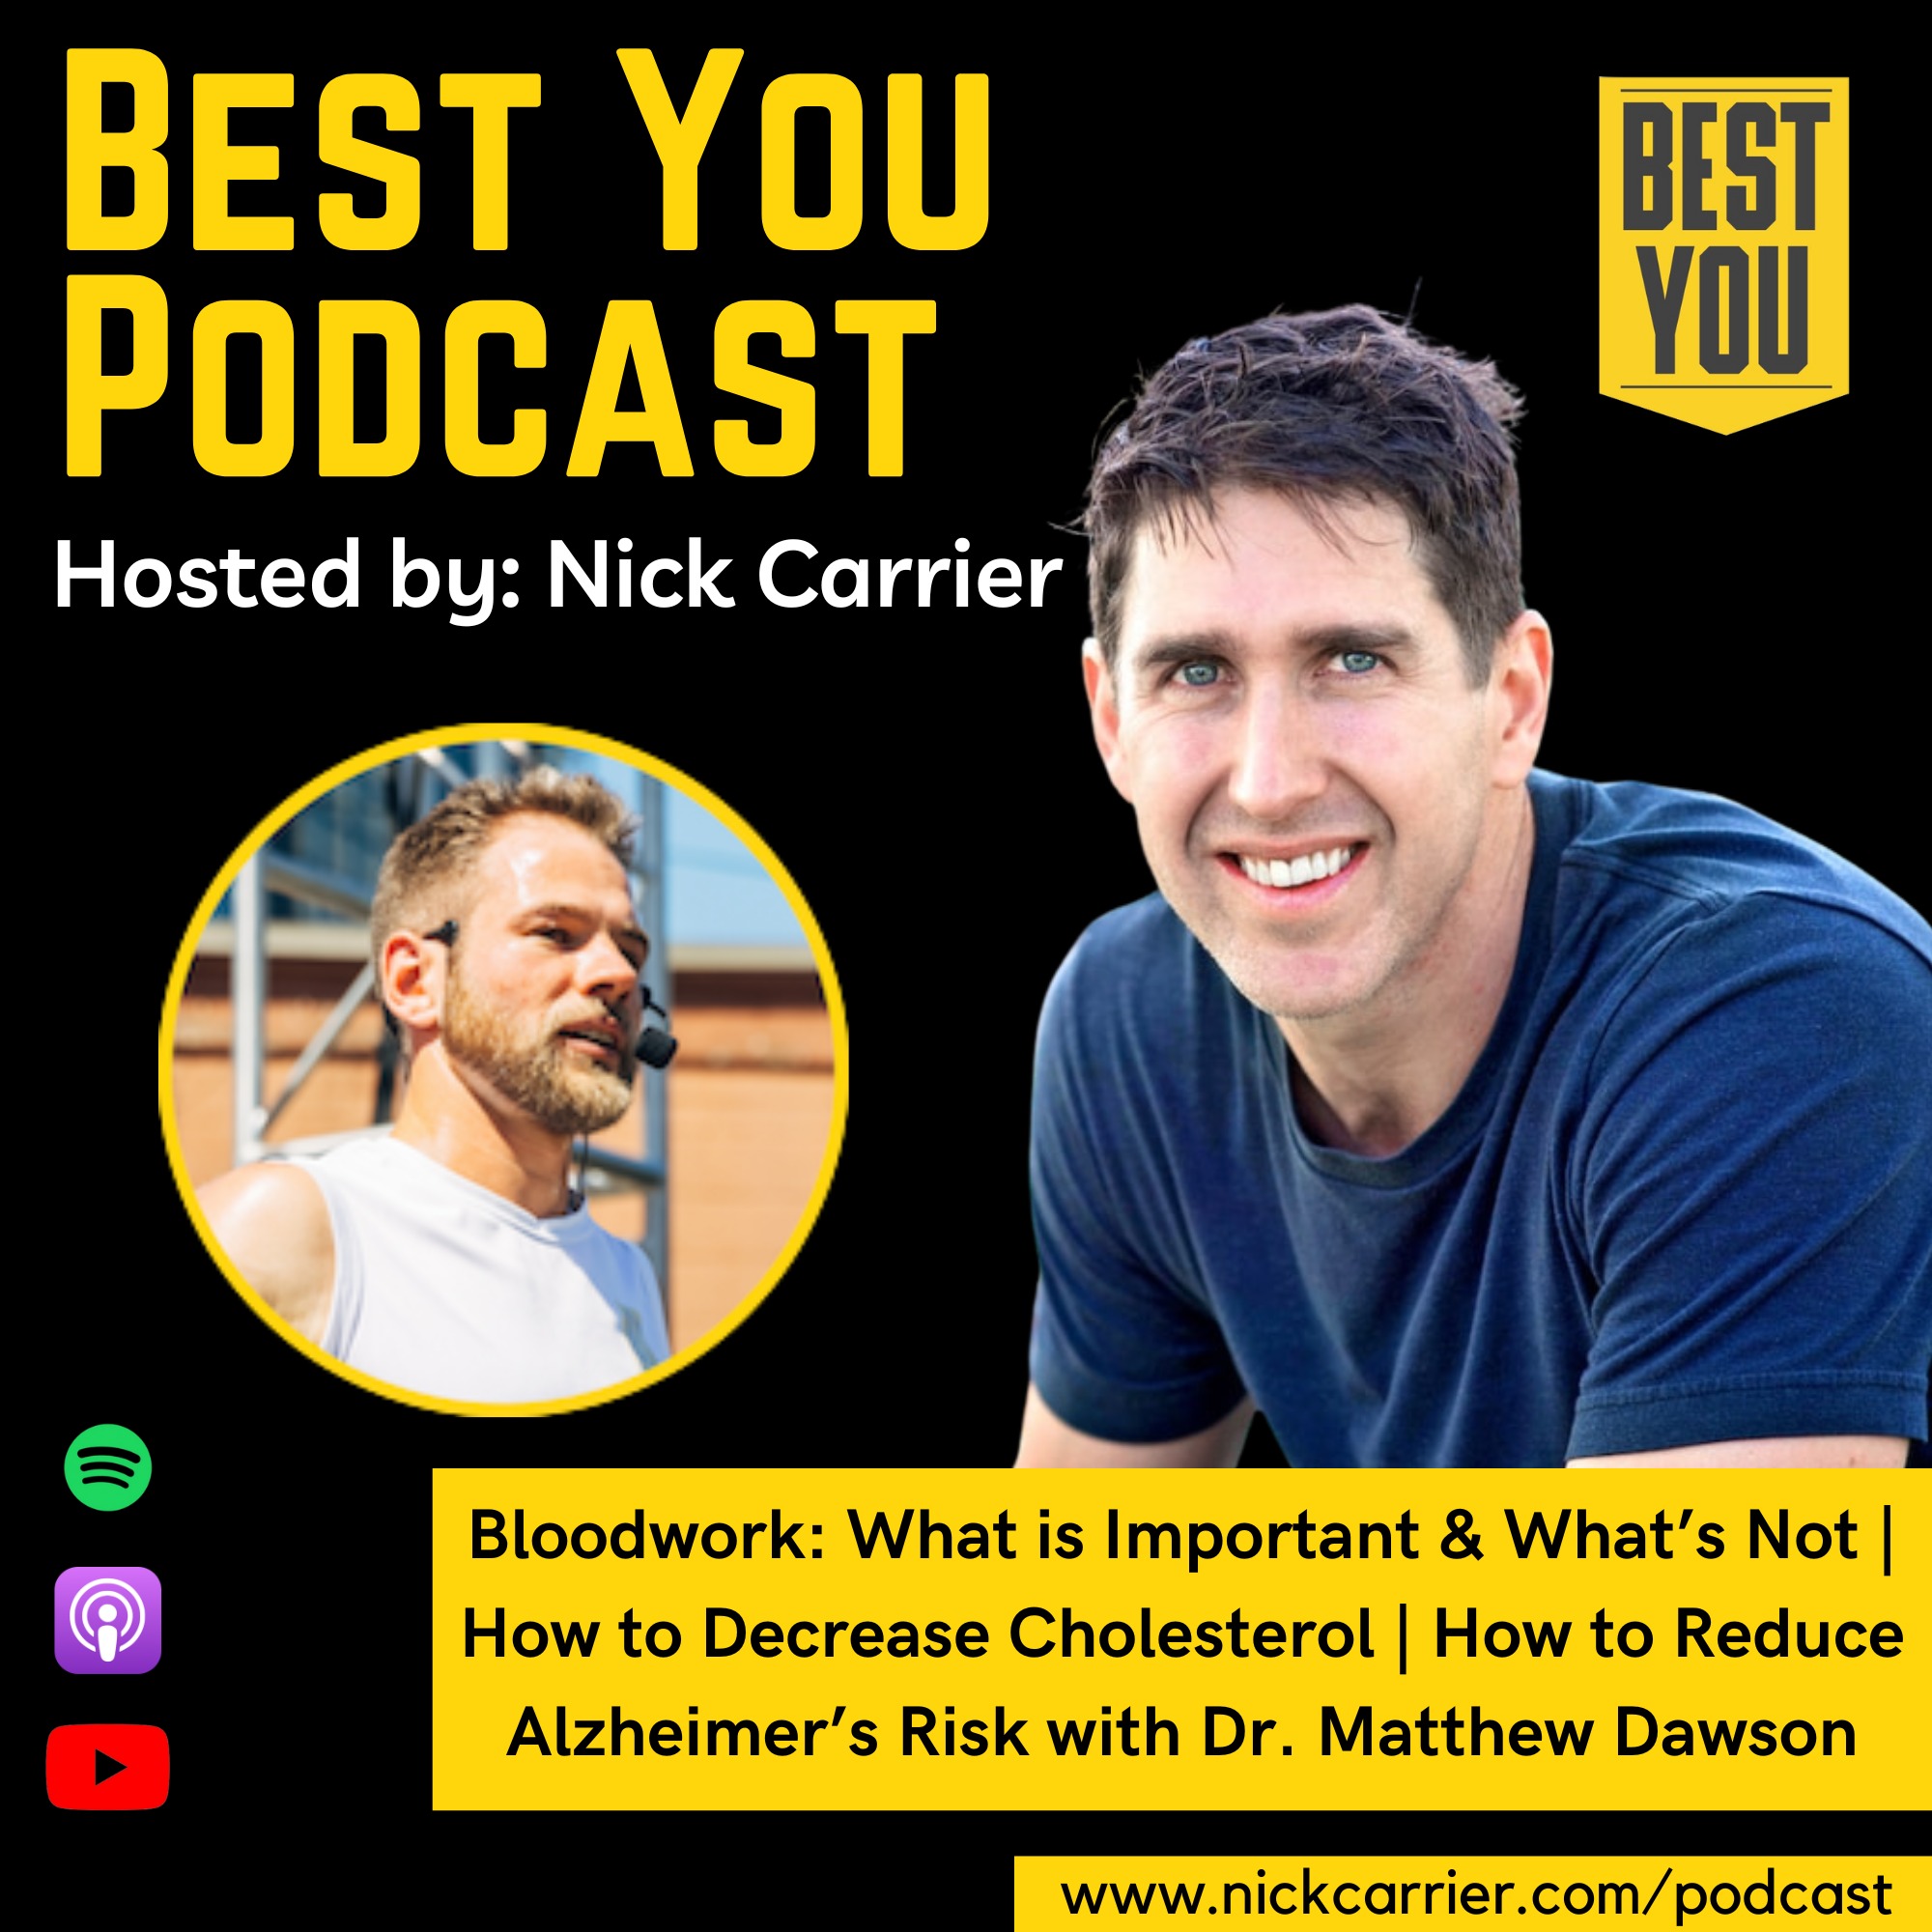 Bloodwork: What is Important & What’s Not | How to Decrease Cholesterol | How to Reduce Alzheimer’s Risk with Dr. Matthew Dawson